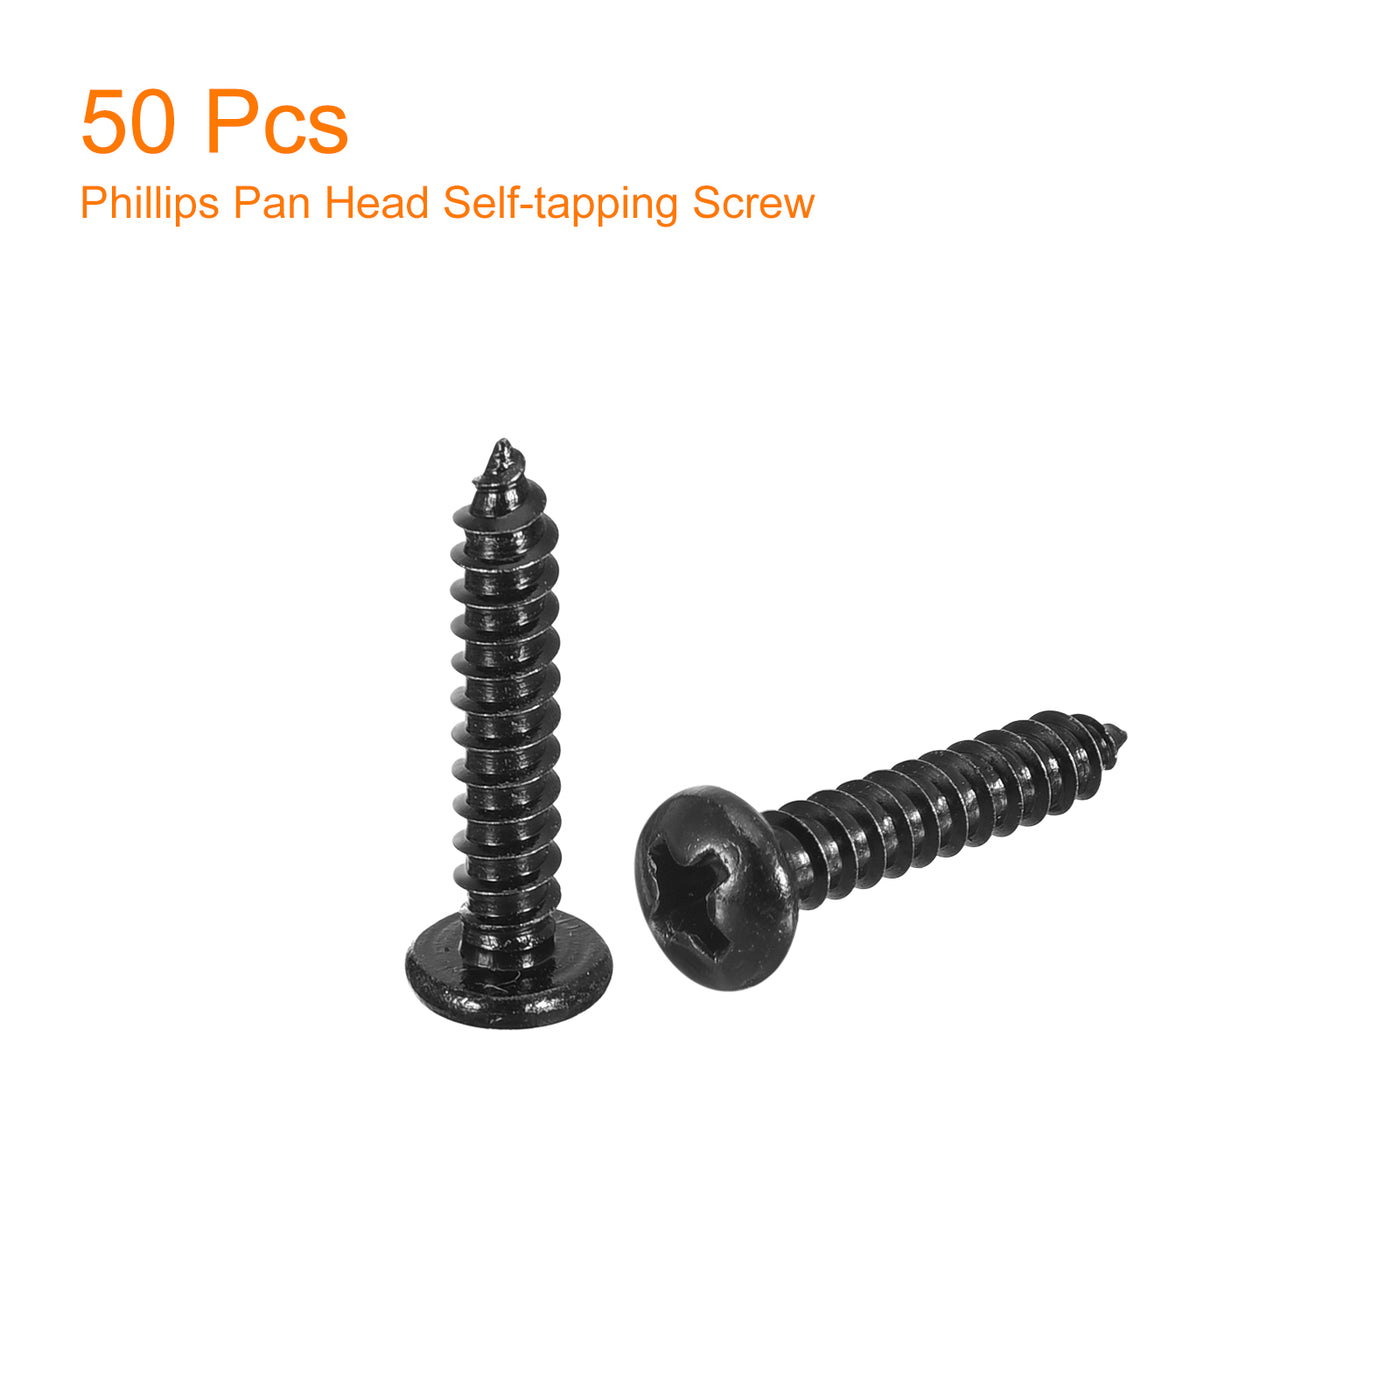 uxcell Uxcell #6 x 11/16" Phillips Pan Head Self-tapping Screw, 50pcs - 304 Stainless Steel Round Head Wood Screw Full Thread (Black)